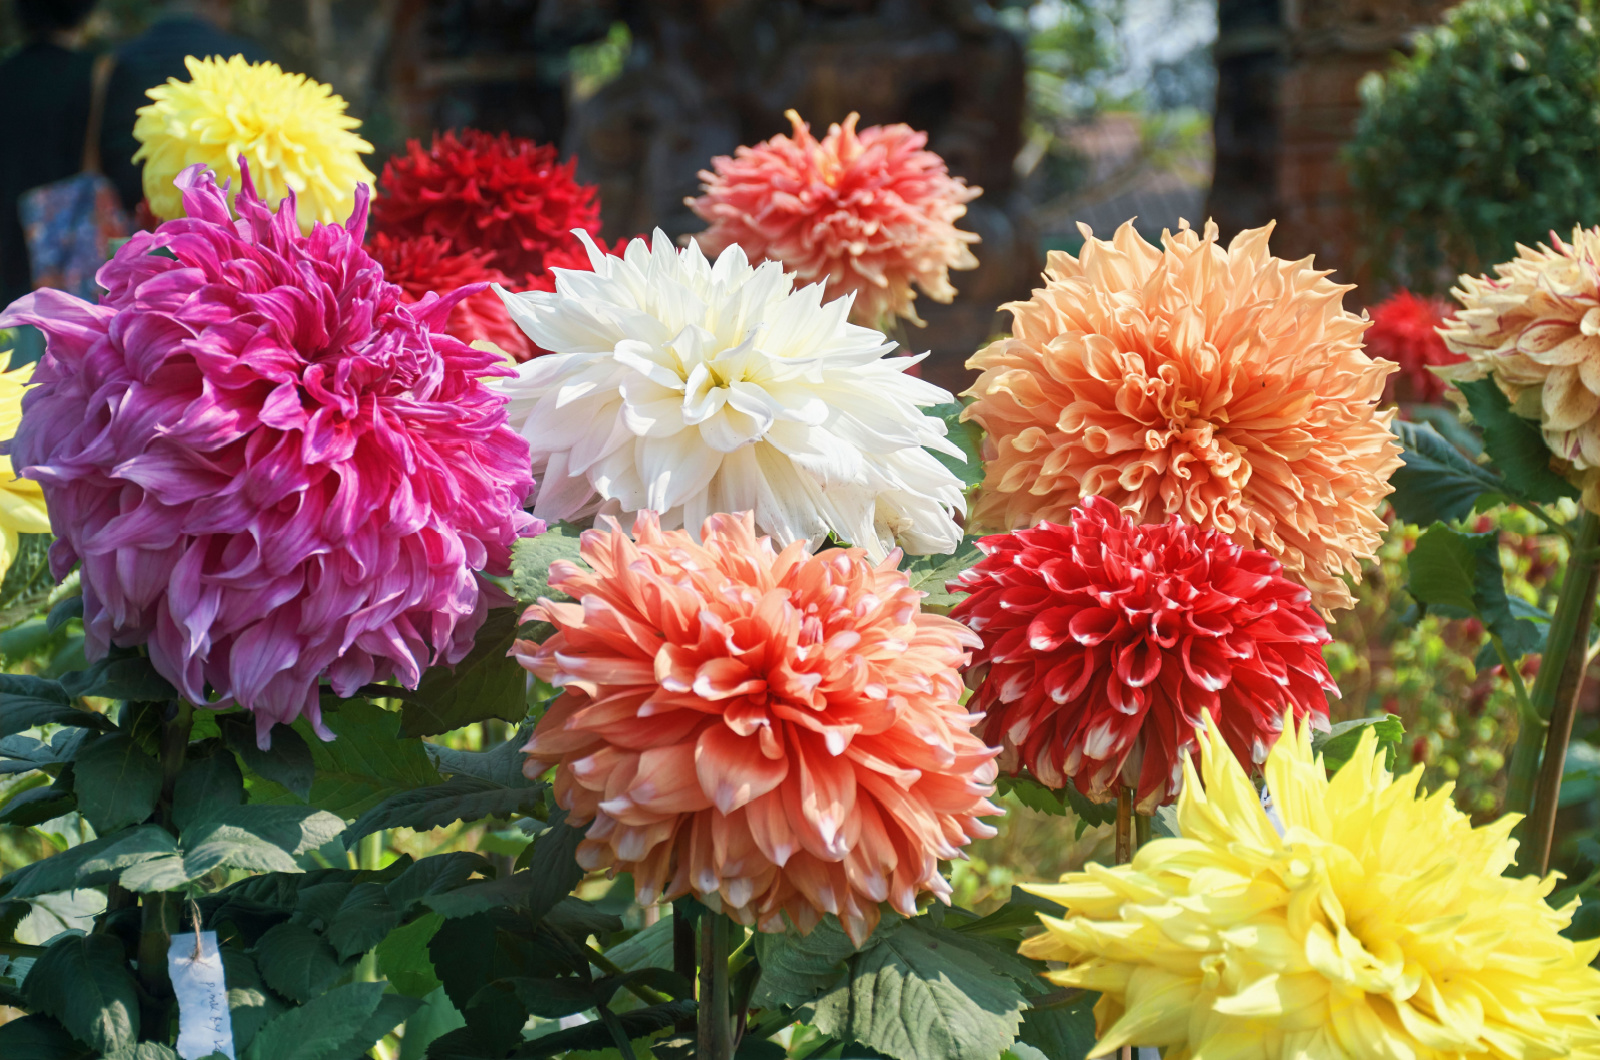 Dahlia flowers with different colors